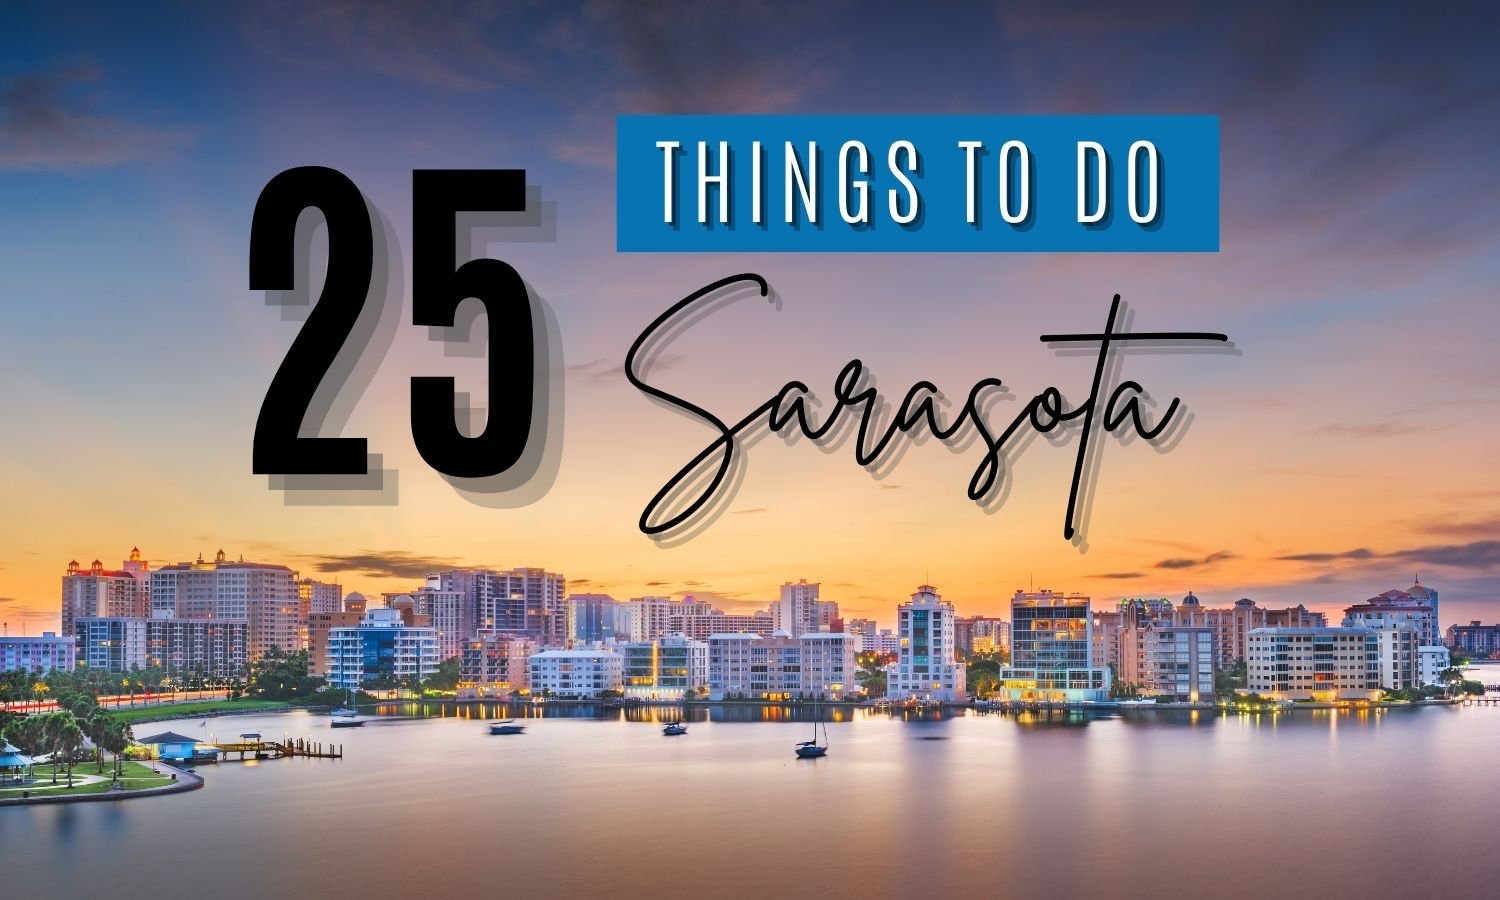 The Top 25 Things to Do in Sarasota